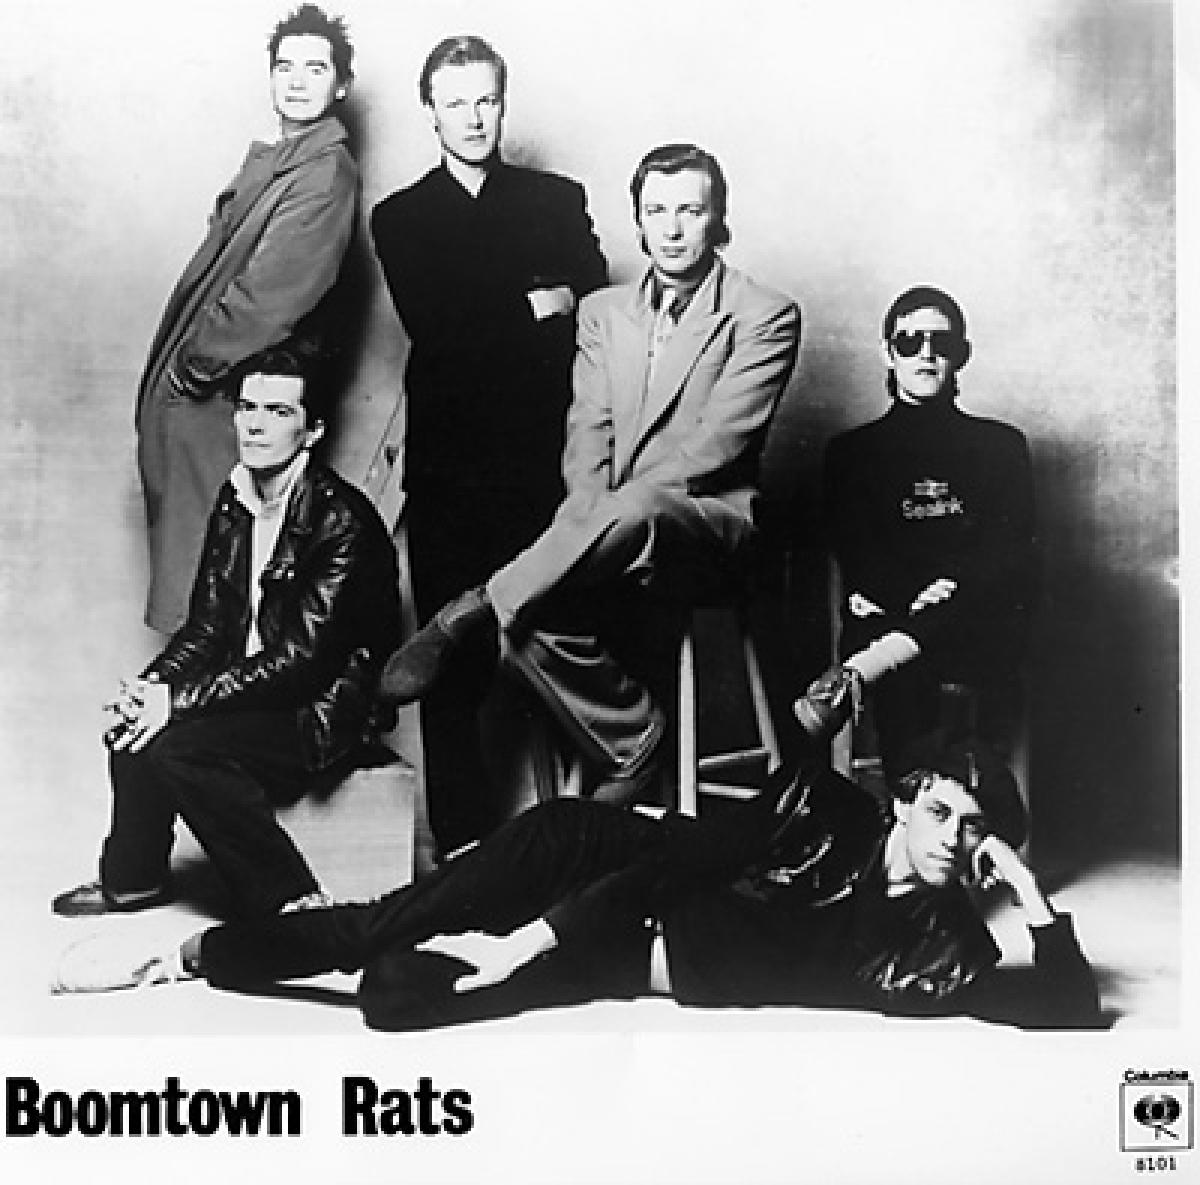 boomtown rats tour history